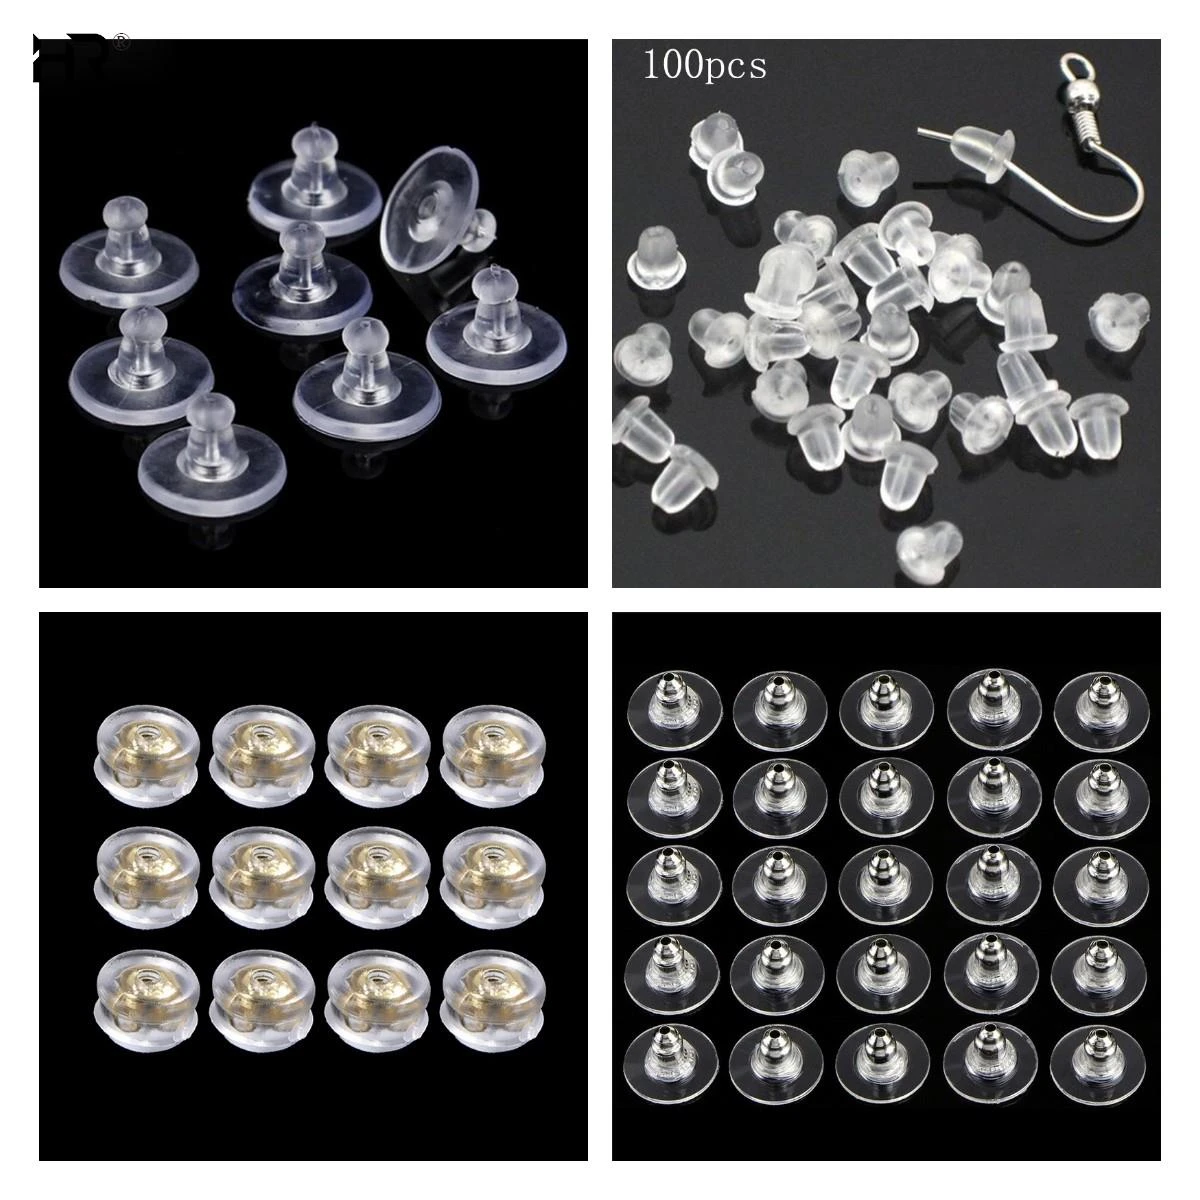 50Pcs/60/pcs/100pcs pack Earring Holders Stoppers Soft Nut Silicone Heavy Duty Rubber Earring Backs Sleeves